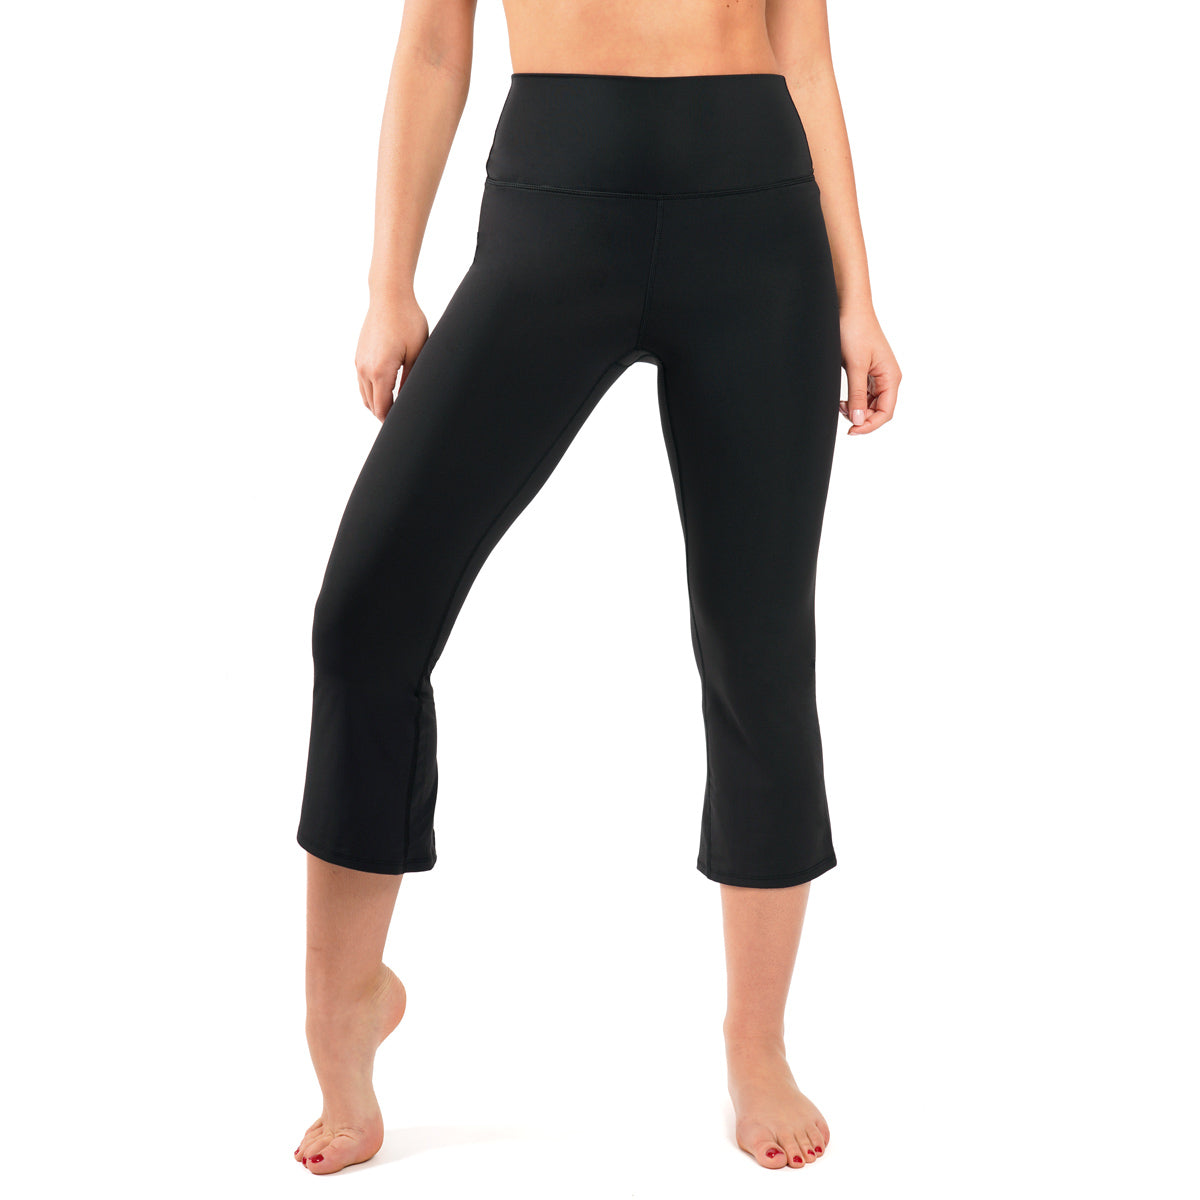 Yogalicious by Reflex Women's Nude Tech High Waist Side Pocket 7/8 Ankle  Legging with Curved Yoke